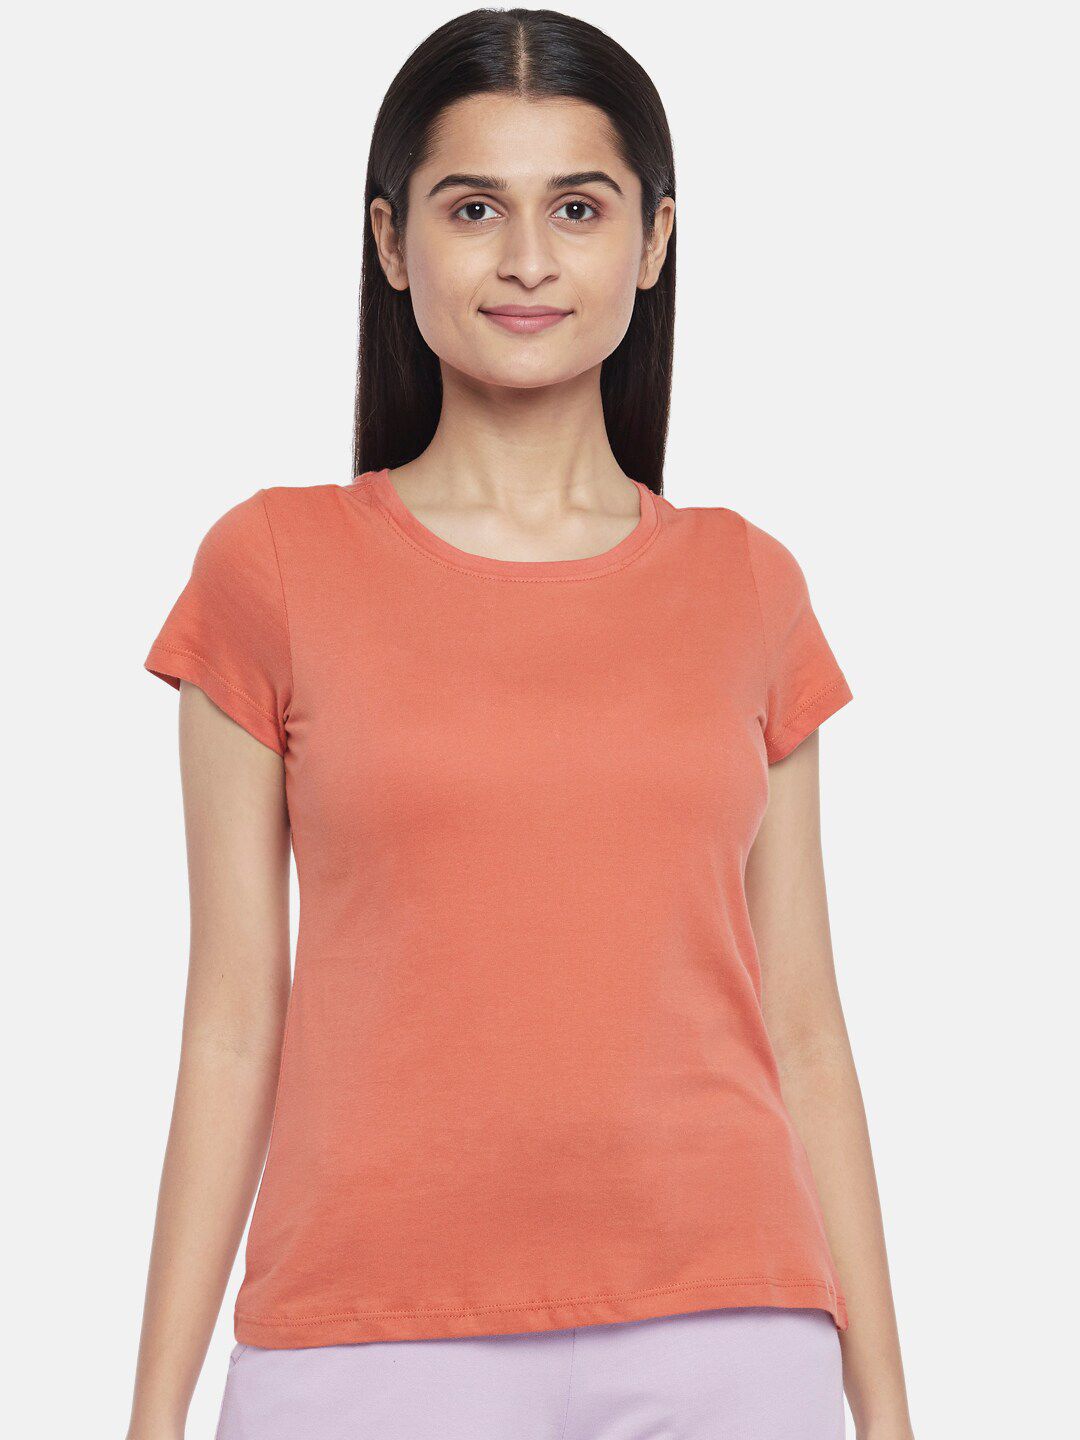 Dreamz by Pantaloons Rust Cotton Regular Lounge tshirt Price in India